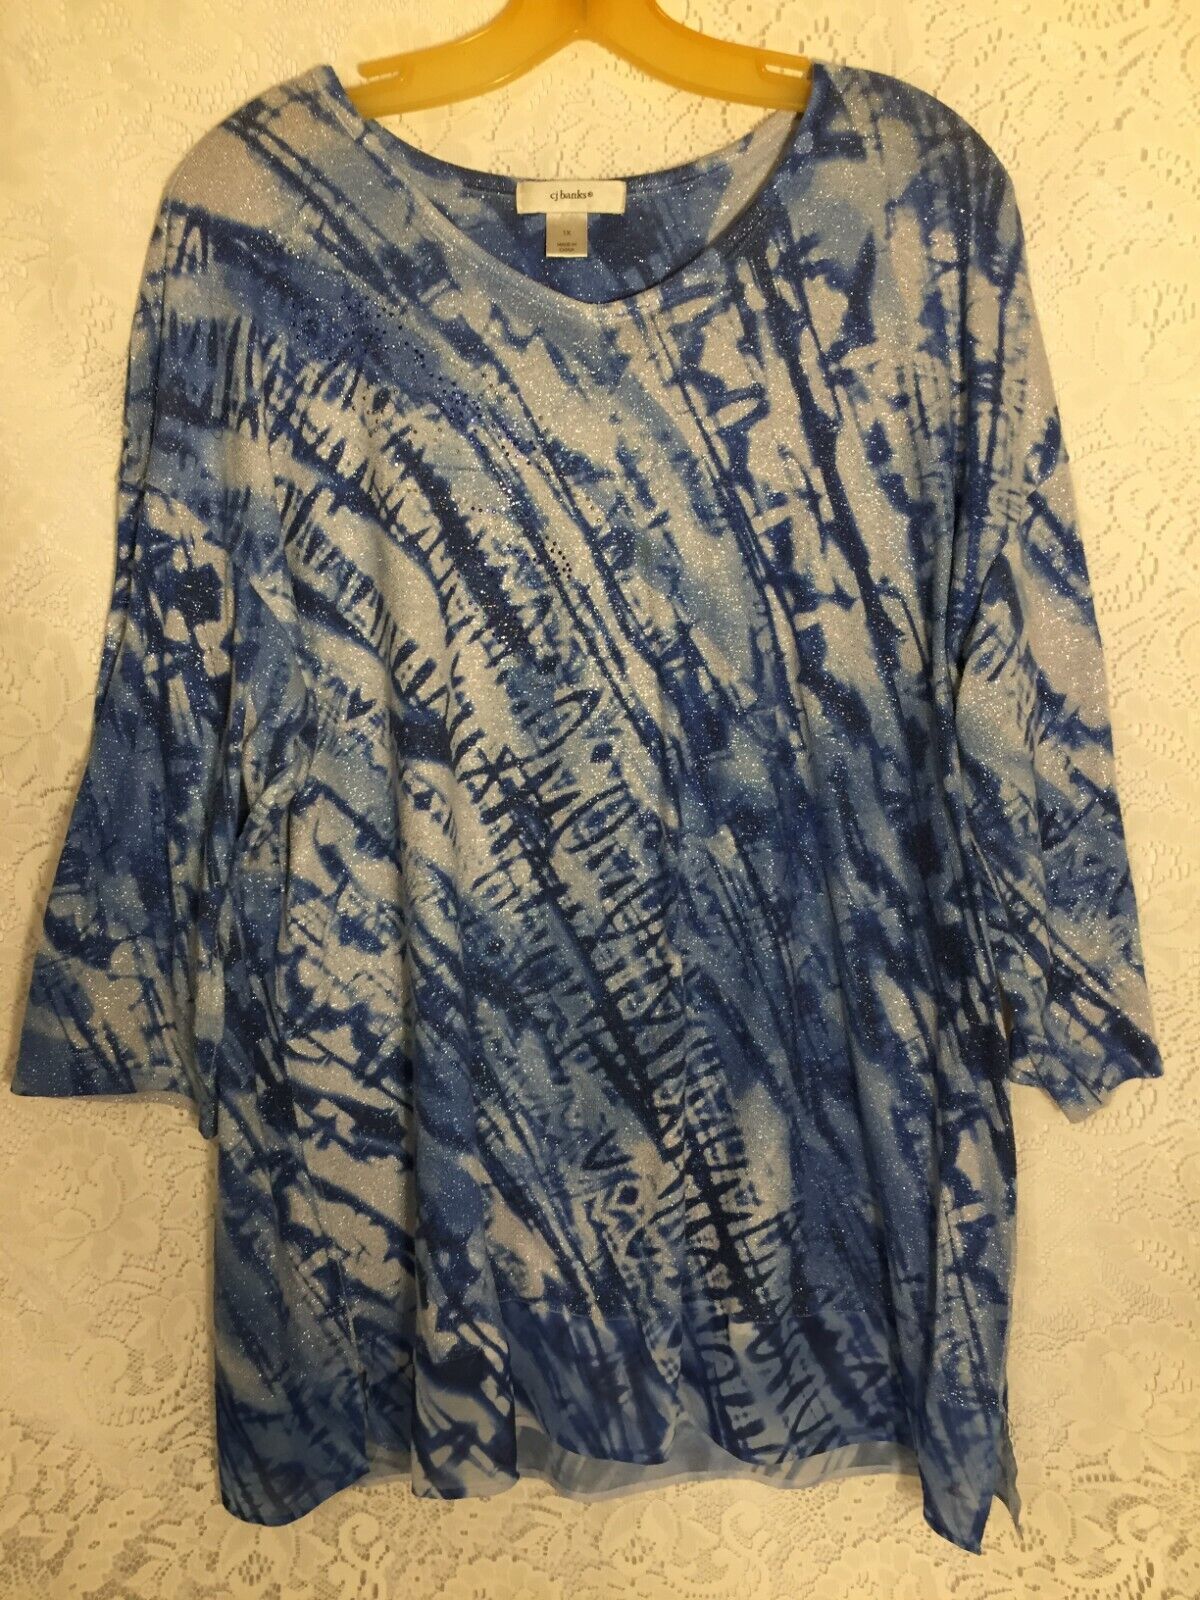 Primary image for Women, Ladies, Girls Pull Over Top Blouse Blue & White CJ Banks 1X